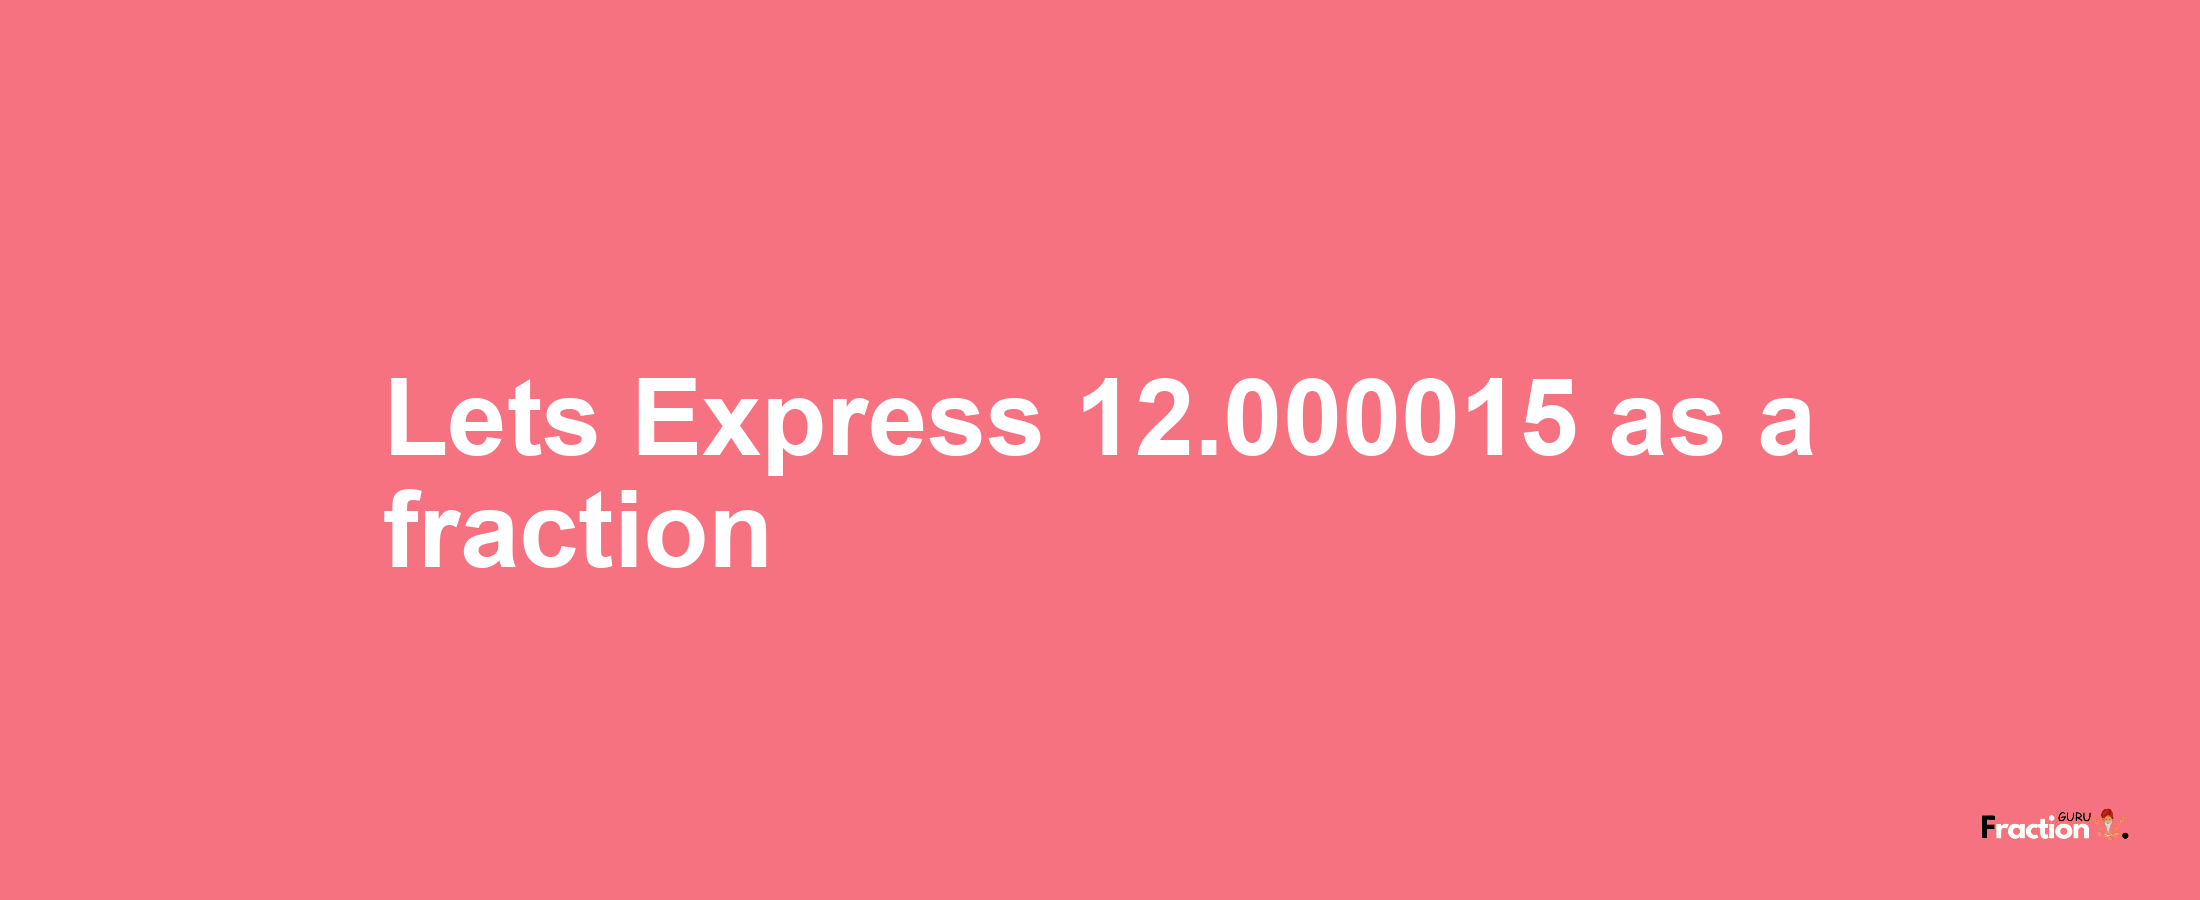 Lets Express 12.000015 as afraction